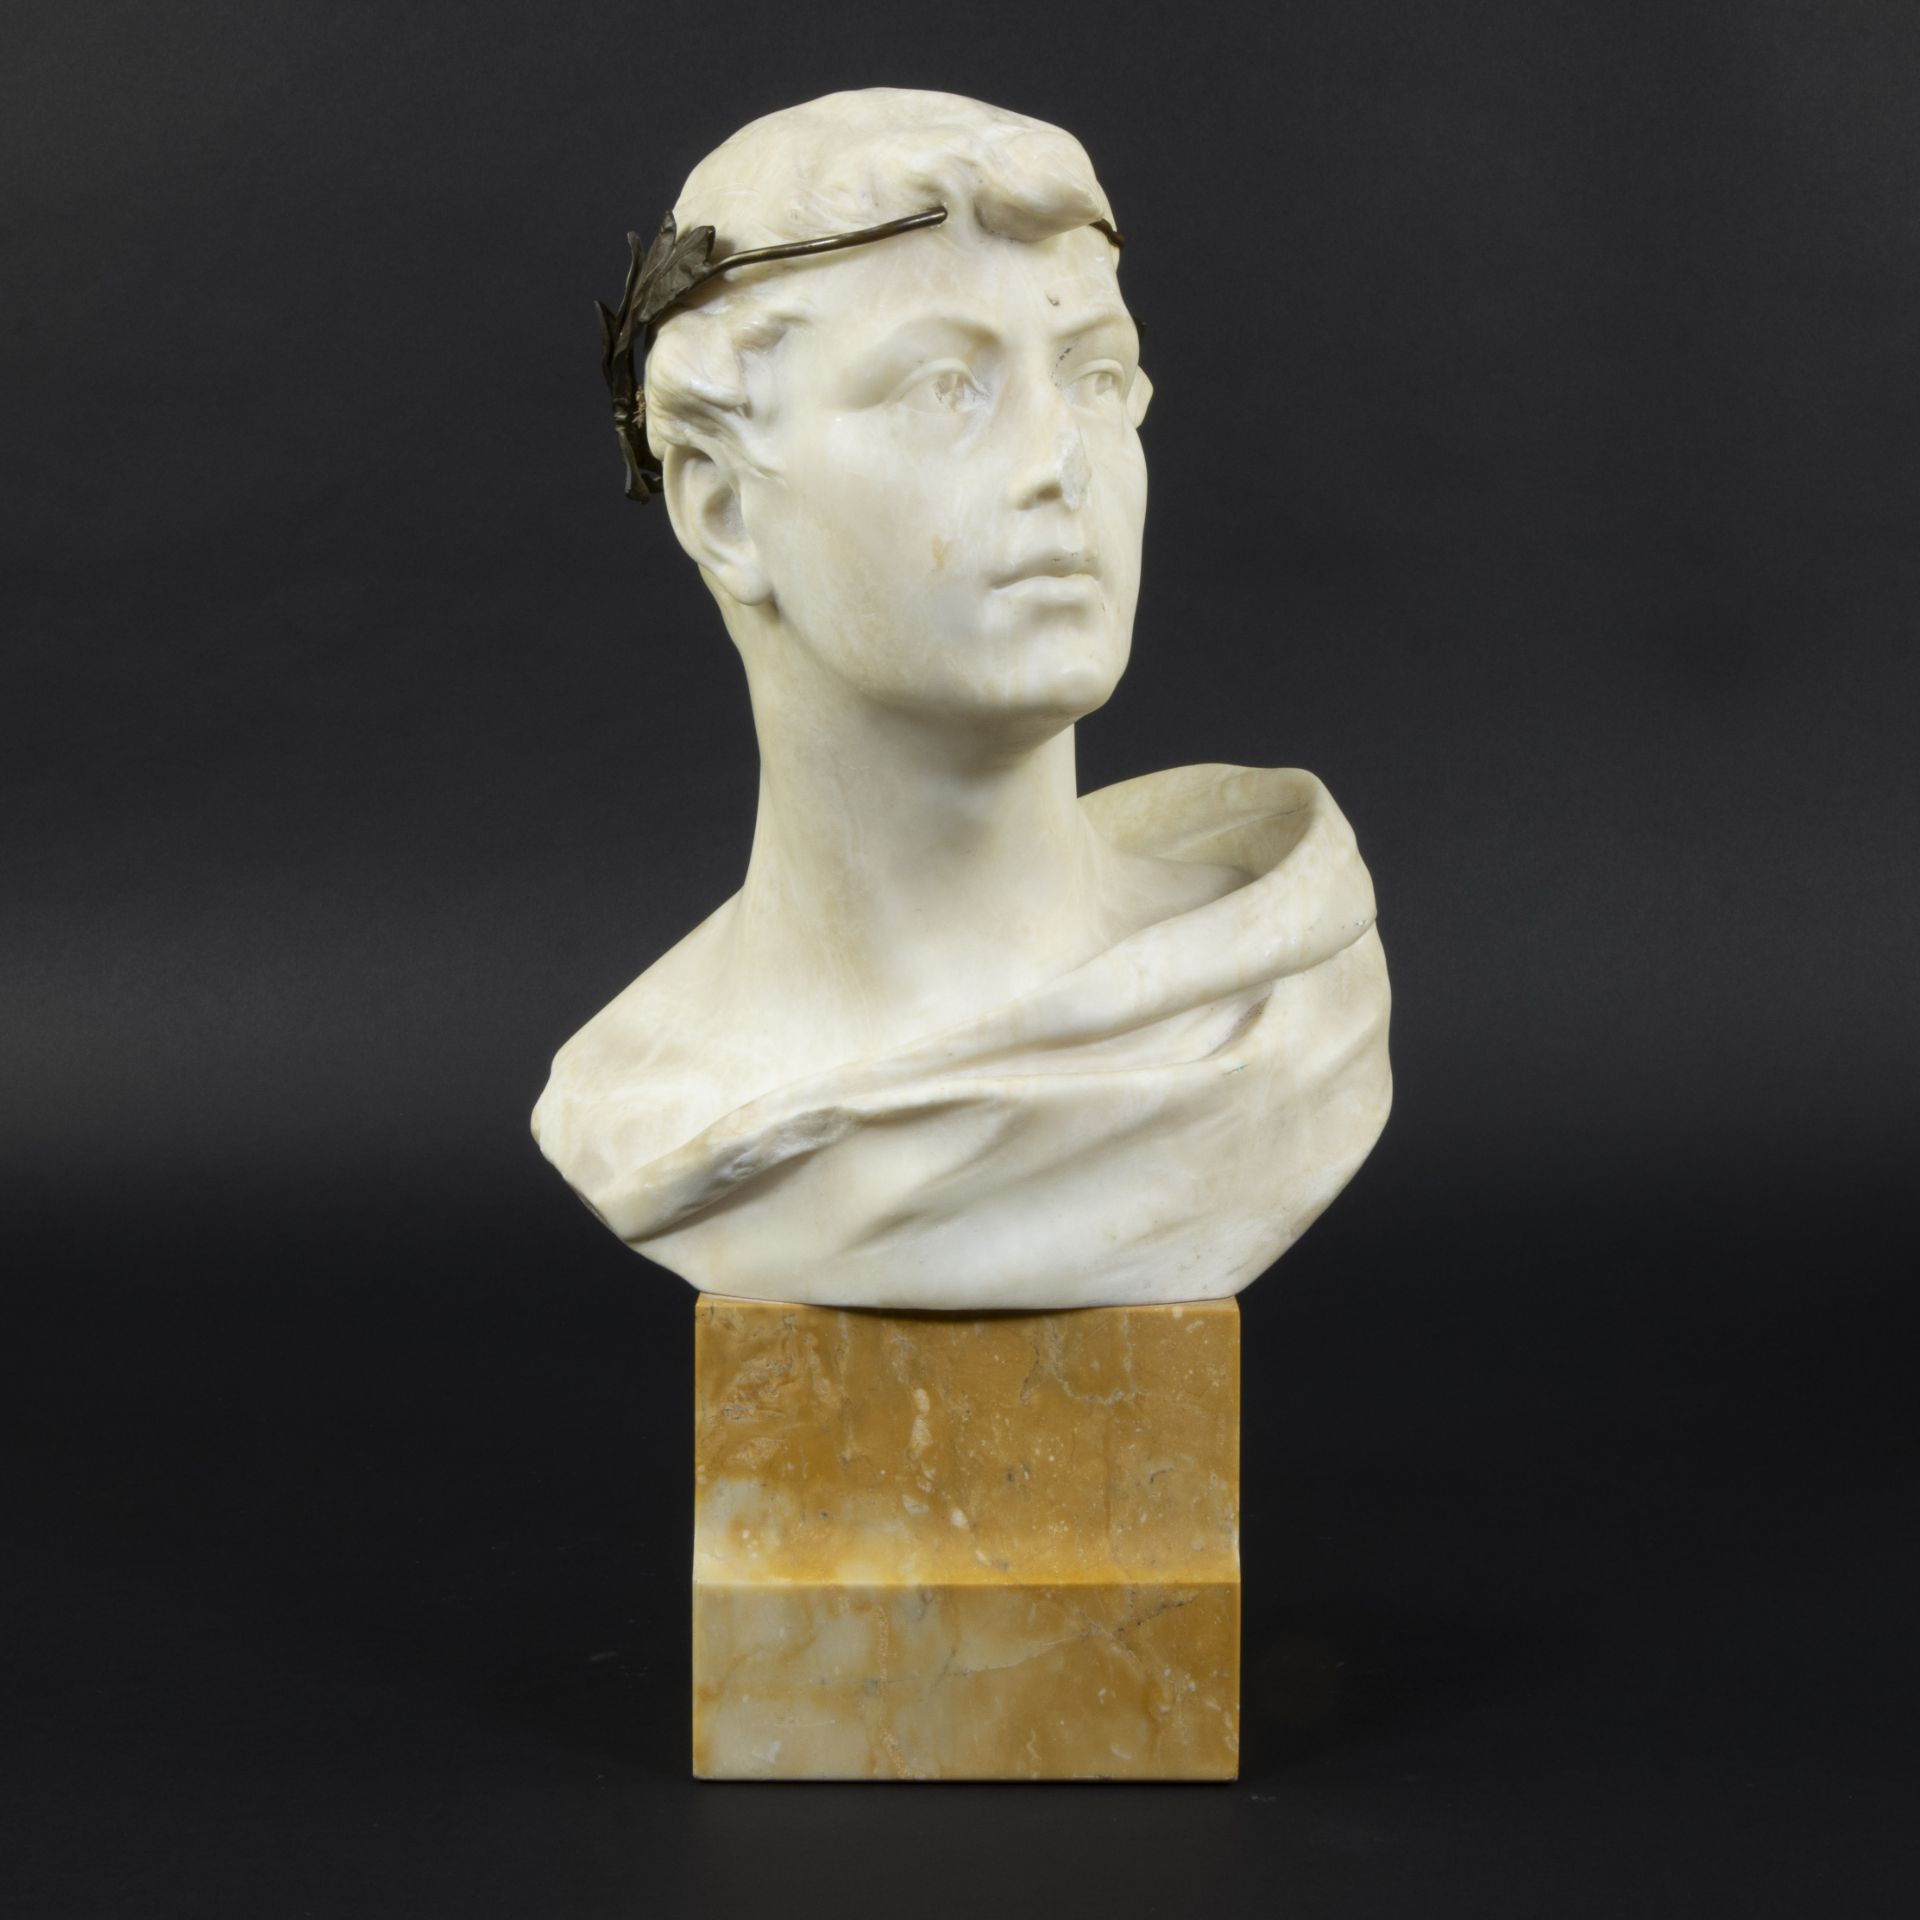 Julius Paul SCHMIDT-FELLING (1835-1920) (attributed), bust of a young victor in alabaster with bronz